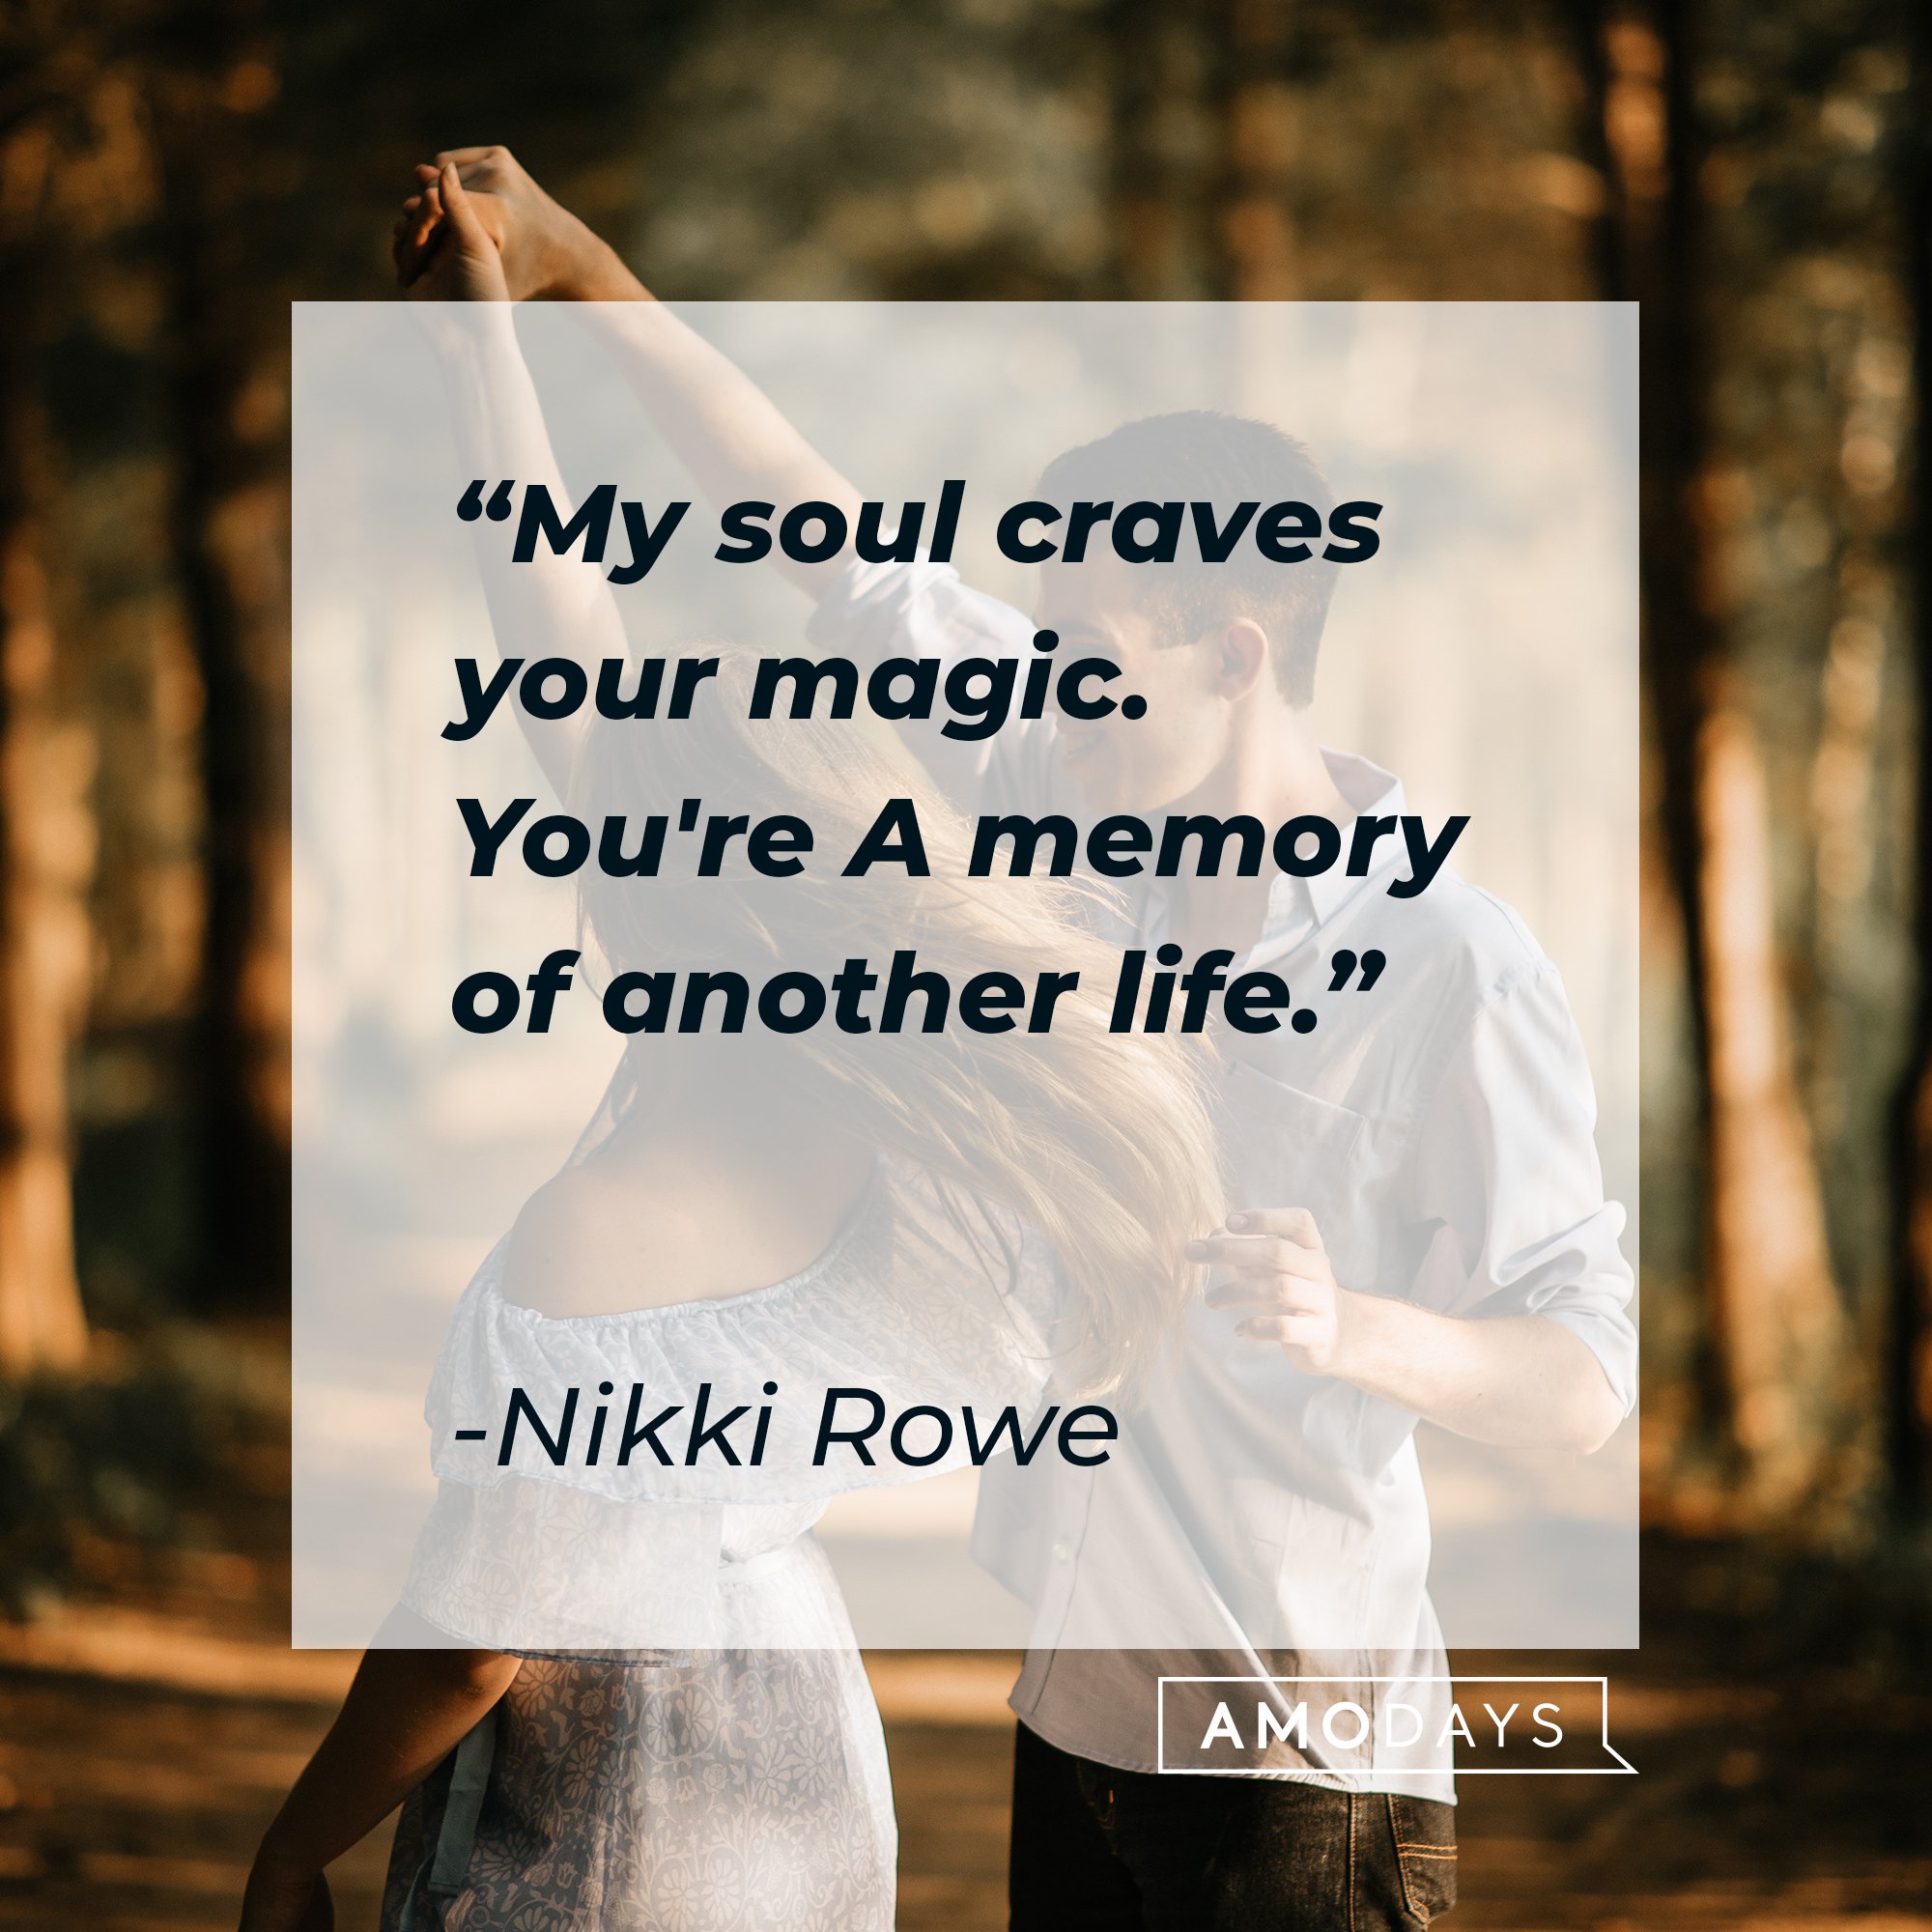 Nikki Rowe’s quote: "My soul craves your magic. You're A memory of another life." | Image: AmoDays